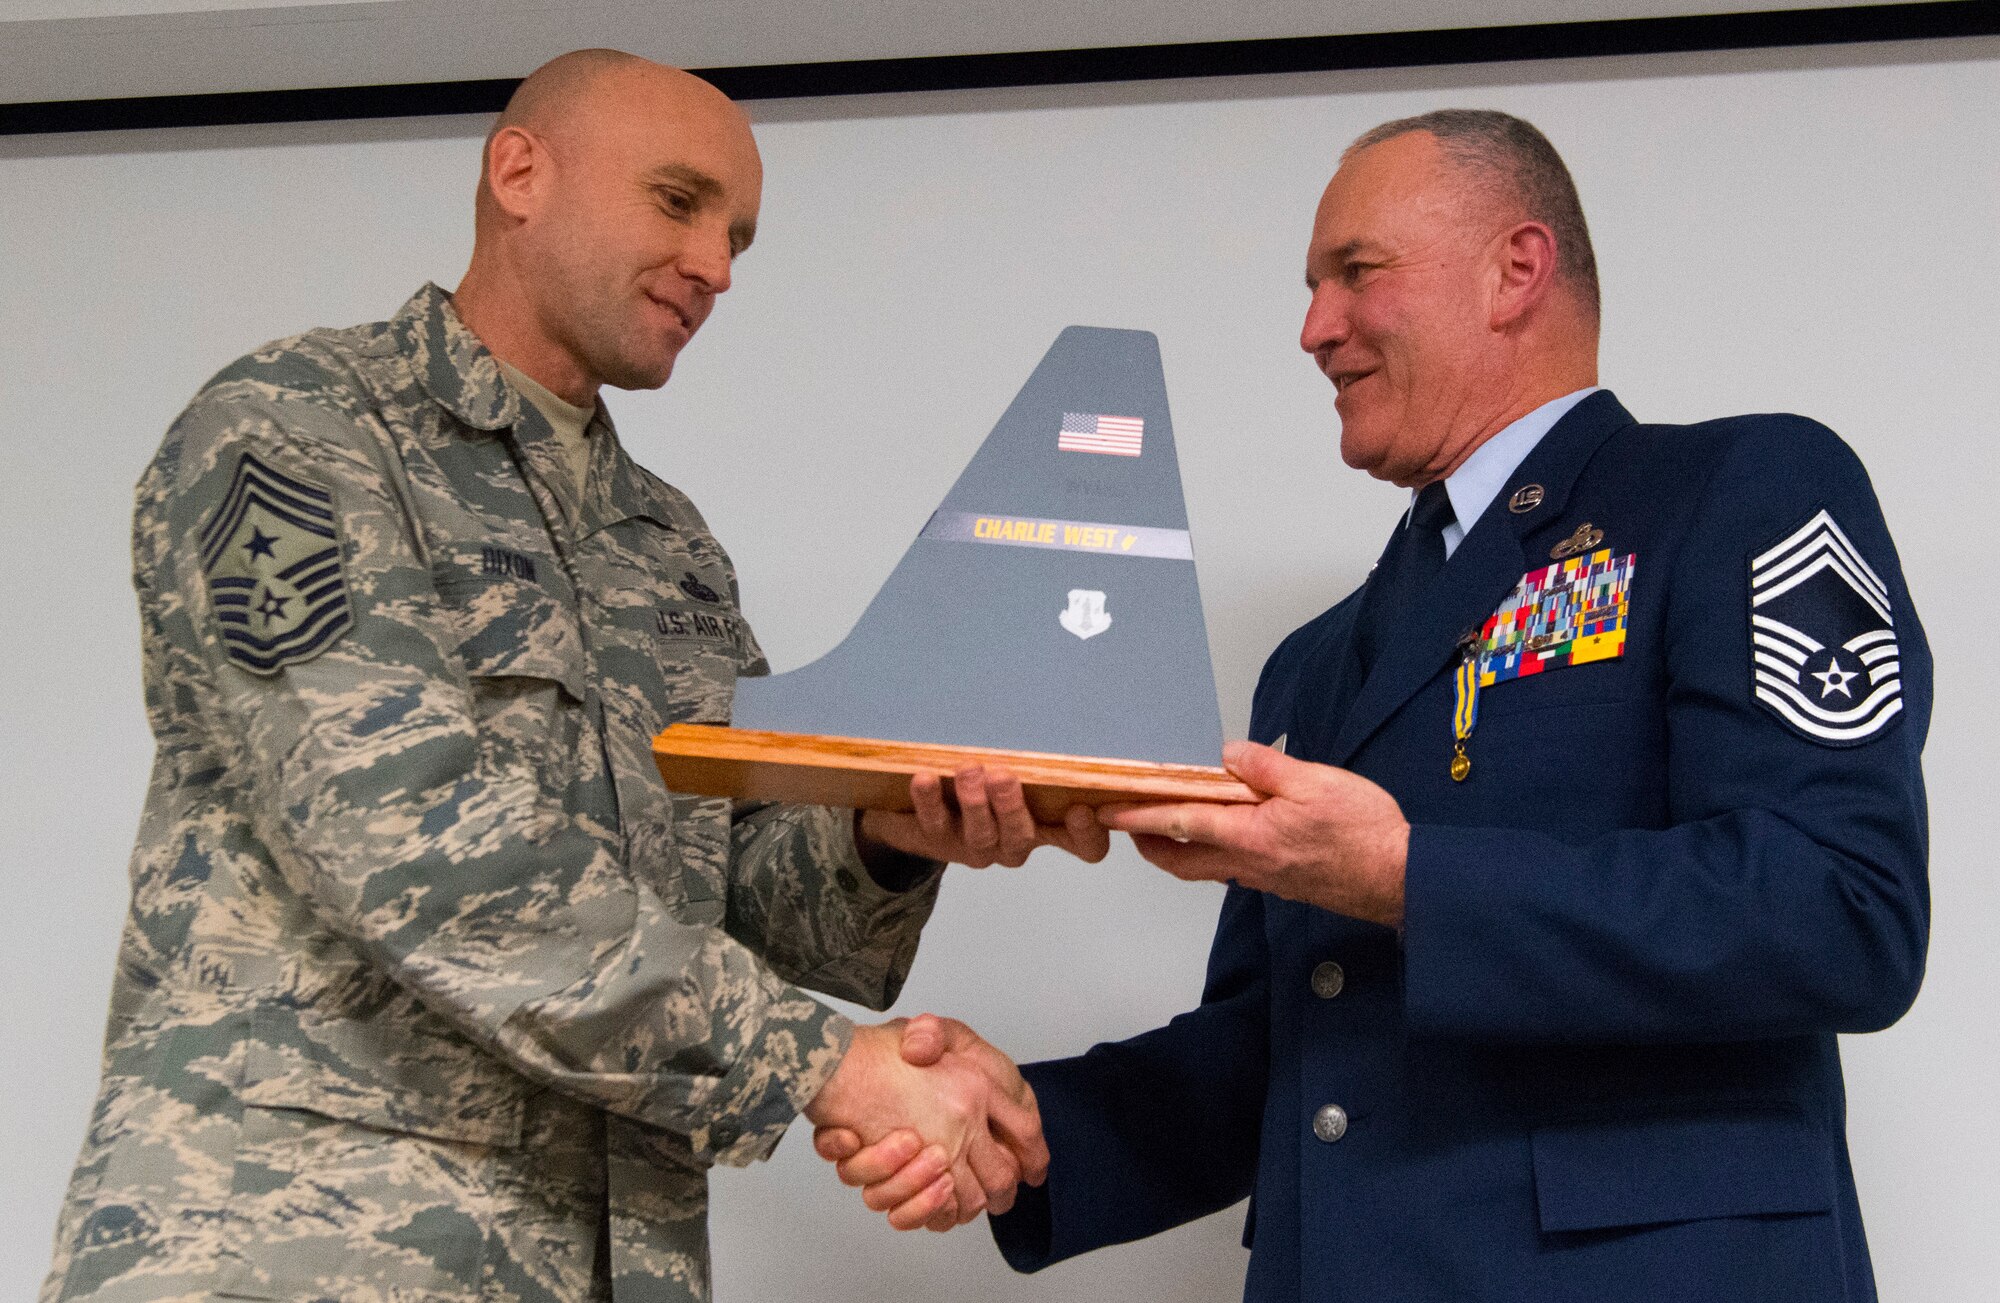 Chief Master Sgt. Jame Dixon, West Virginia Air National Guard State Command Chief, presents a tail flash to Chief Master Sgt. Fred Turner during a formal retirement ceremony held Jan. 4, 2019, at McLaughlin Air National Guard Base, Charleston, W.Va. Turner served in the California and West Virginia Air National Guard for 41 years cumulatively and was also the 12th State Command Chief for the West Virginia Air National Guard. (U.S. Air National Guard photo by Master Sgt. De-Juan Haley)